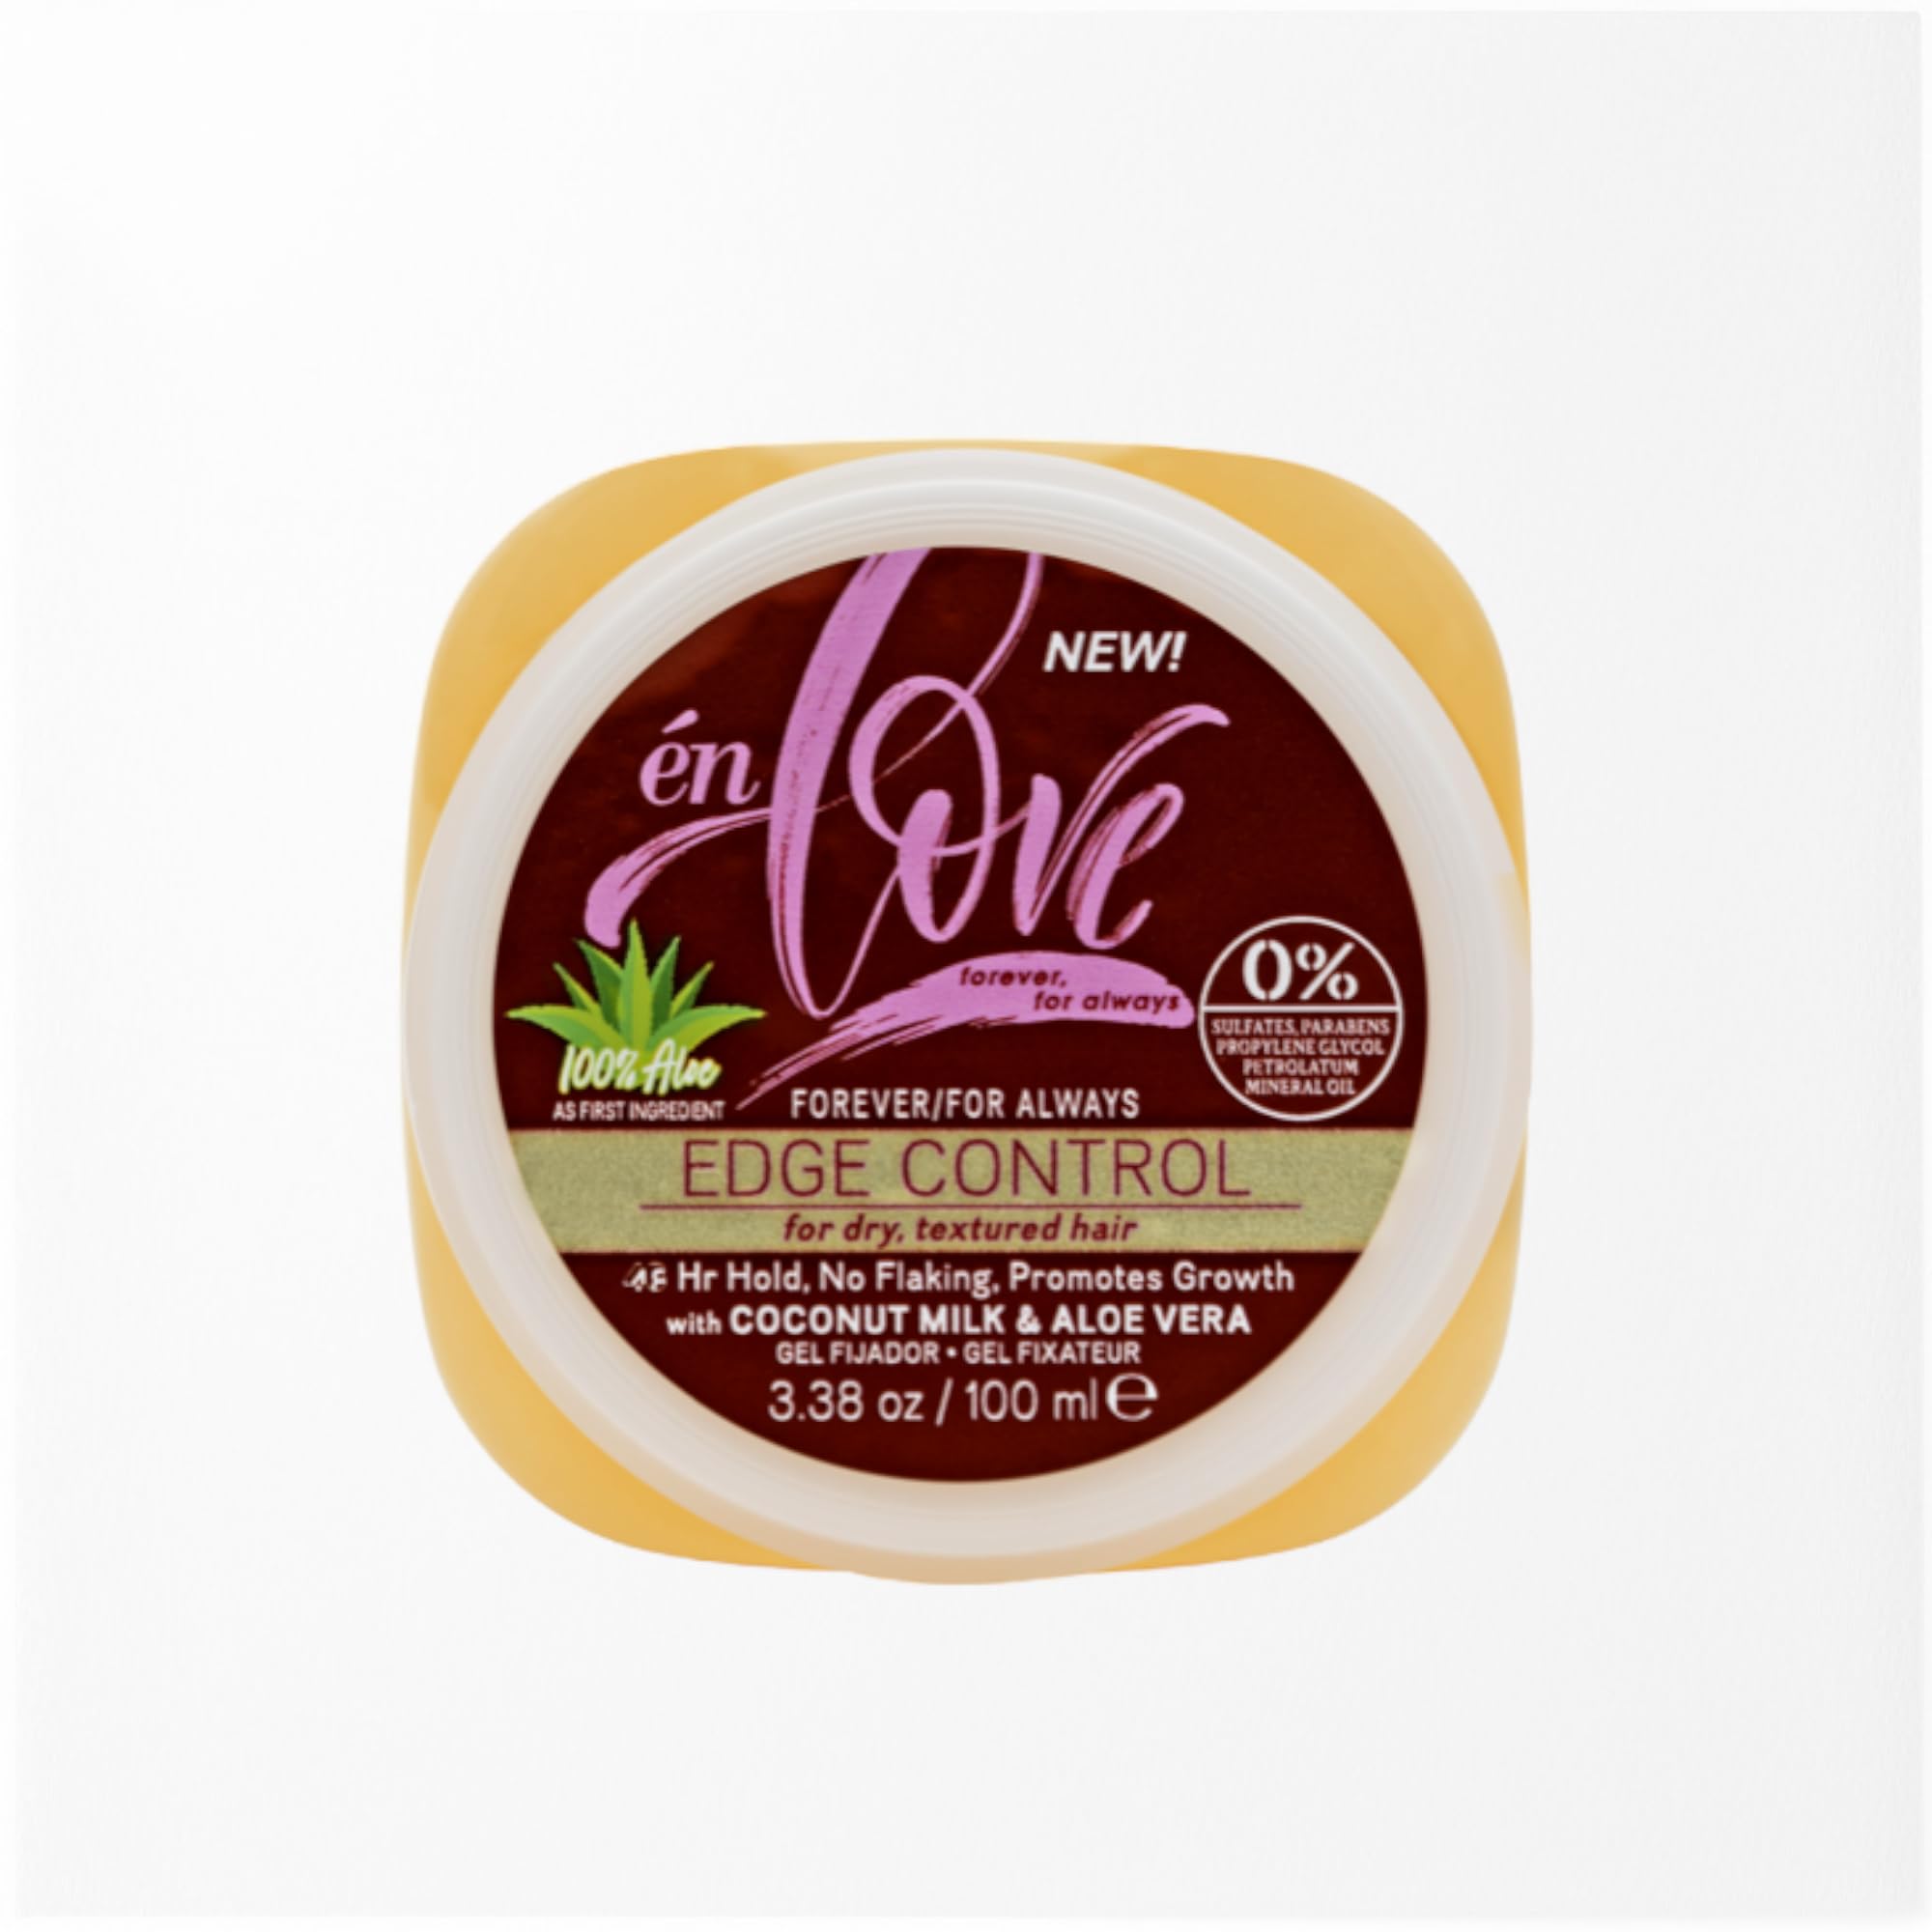 én Love Forever for Always Edge Control Hair Gel with Natural Coconut Milk, Pure Aloe Vera and Argan Oil | 48 Hours Extra Hold Pomade | Promotes Growth | No Flaking | Luminous Shine | 3.38oz